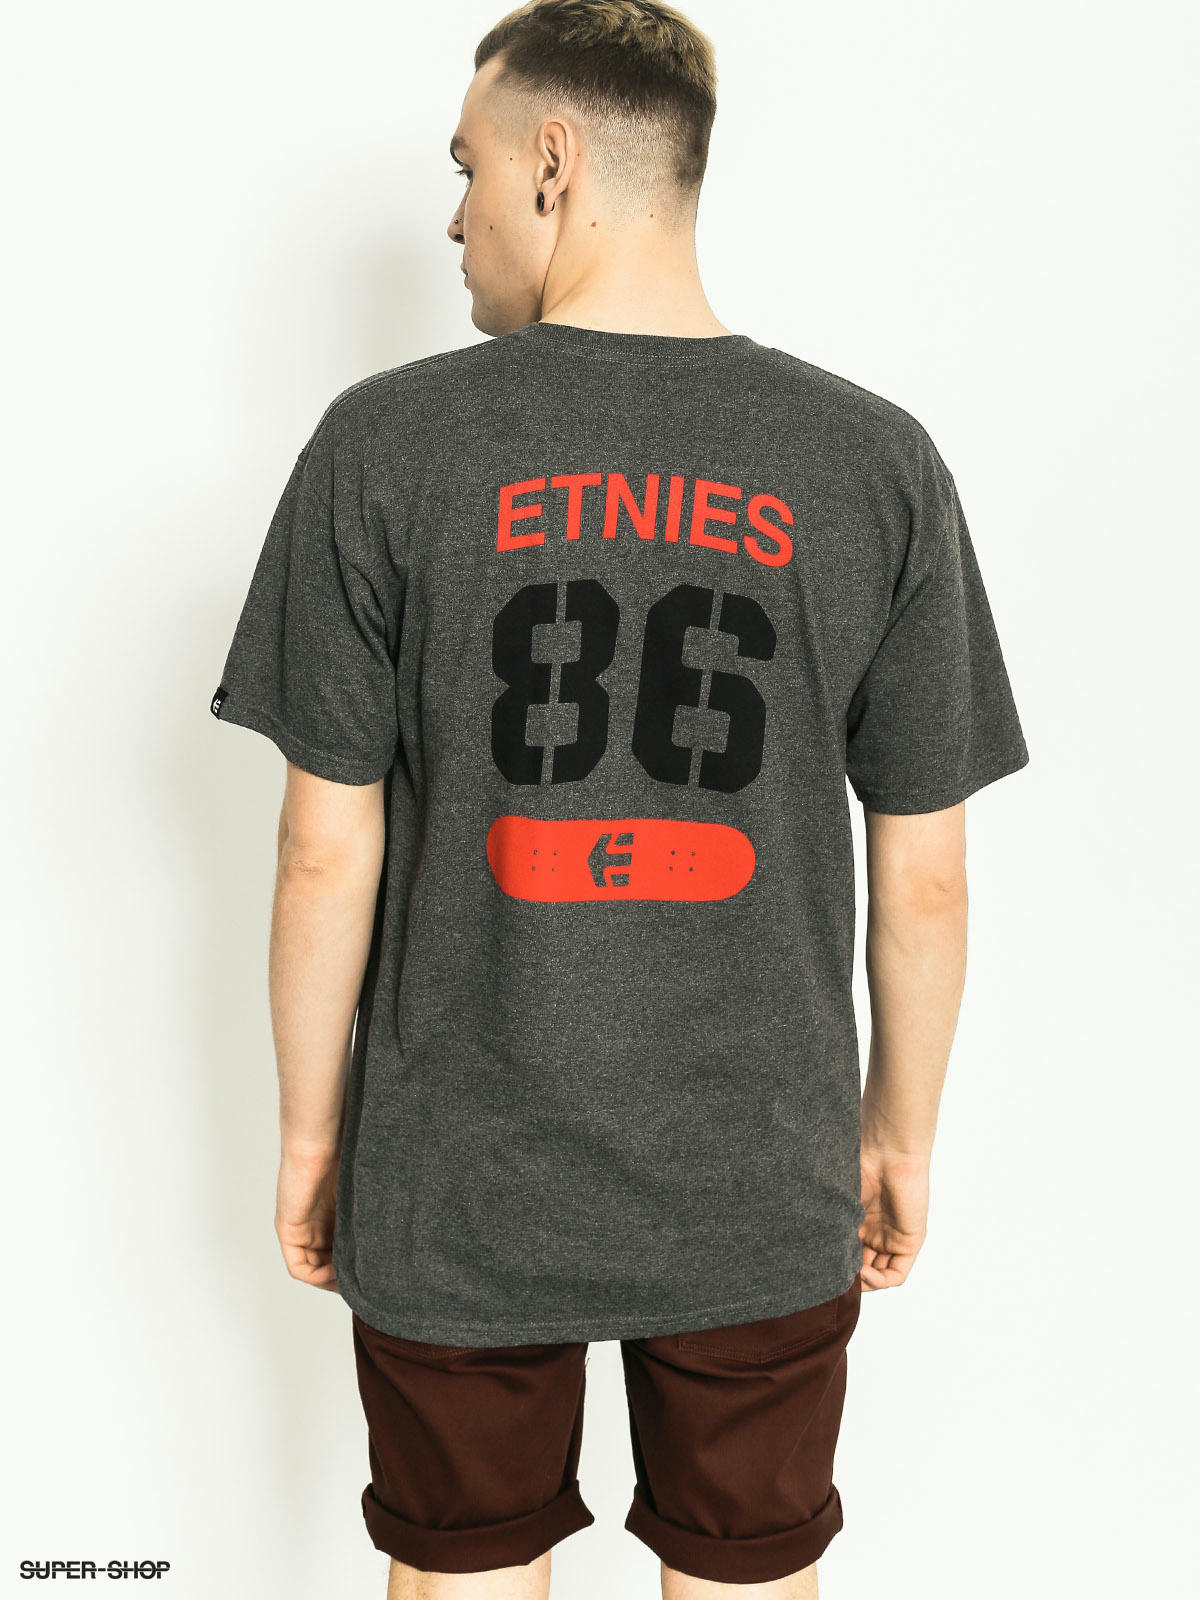 Etnies 86 Team T-Shirt in Charcoal Grey Heather & White 4130003346 